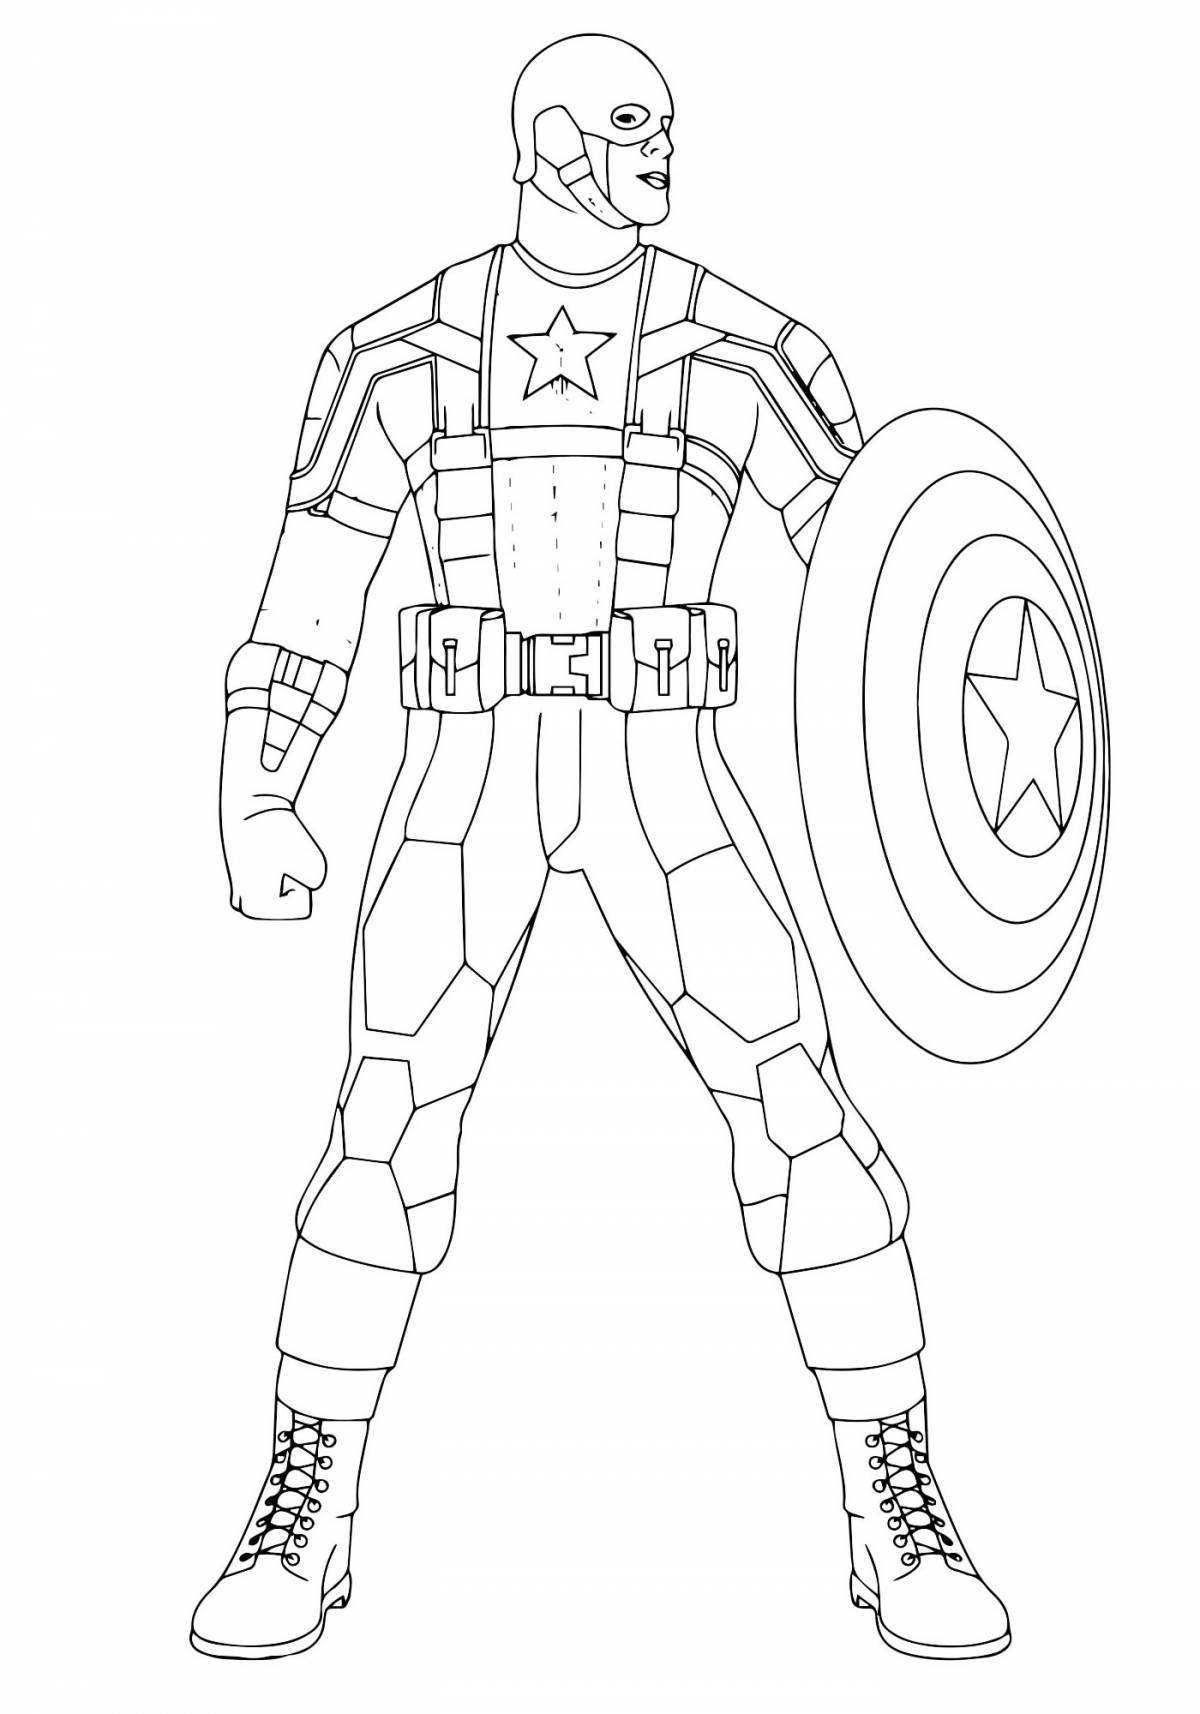 Colourful captain america coloring book for kids